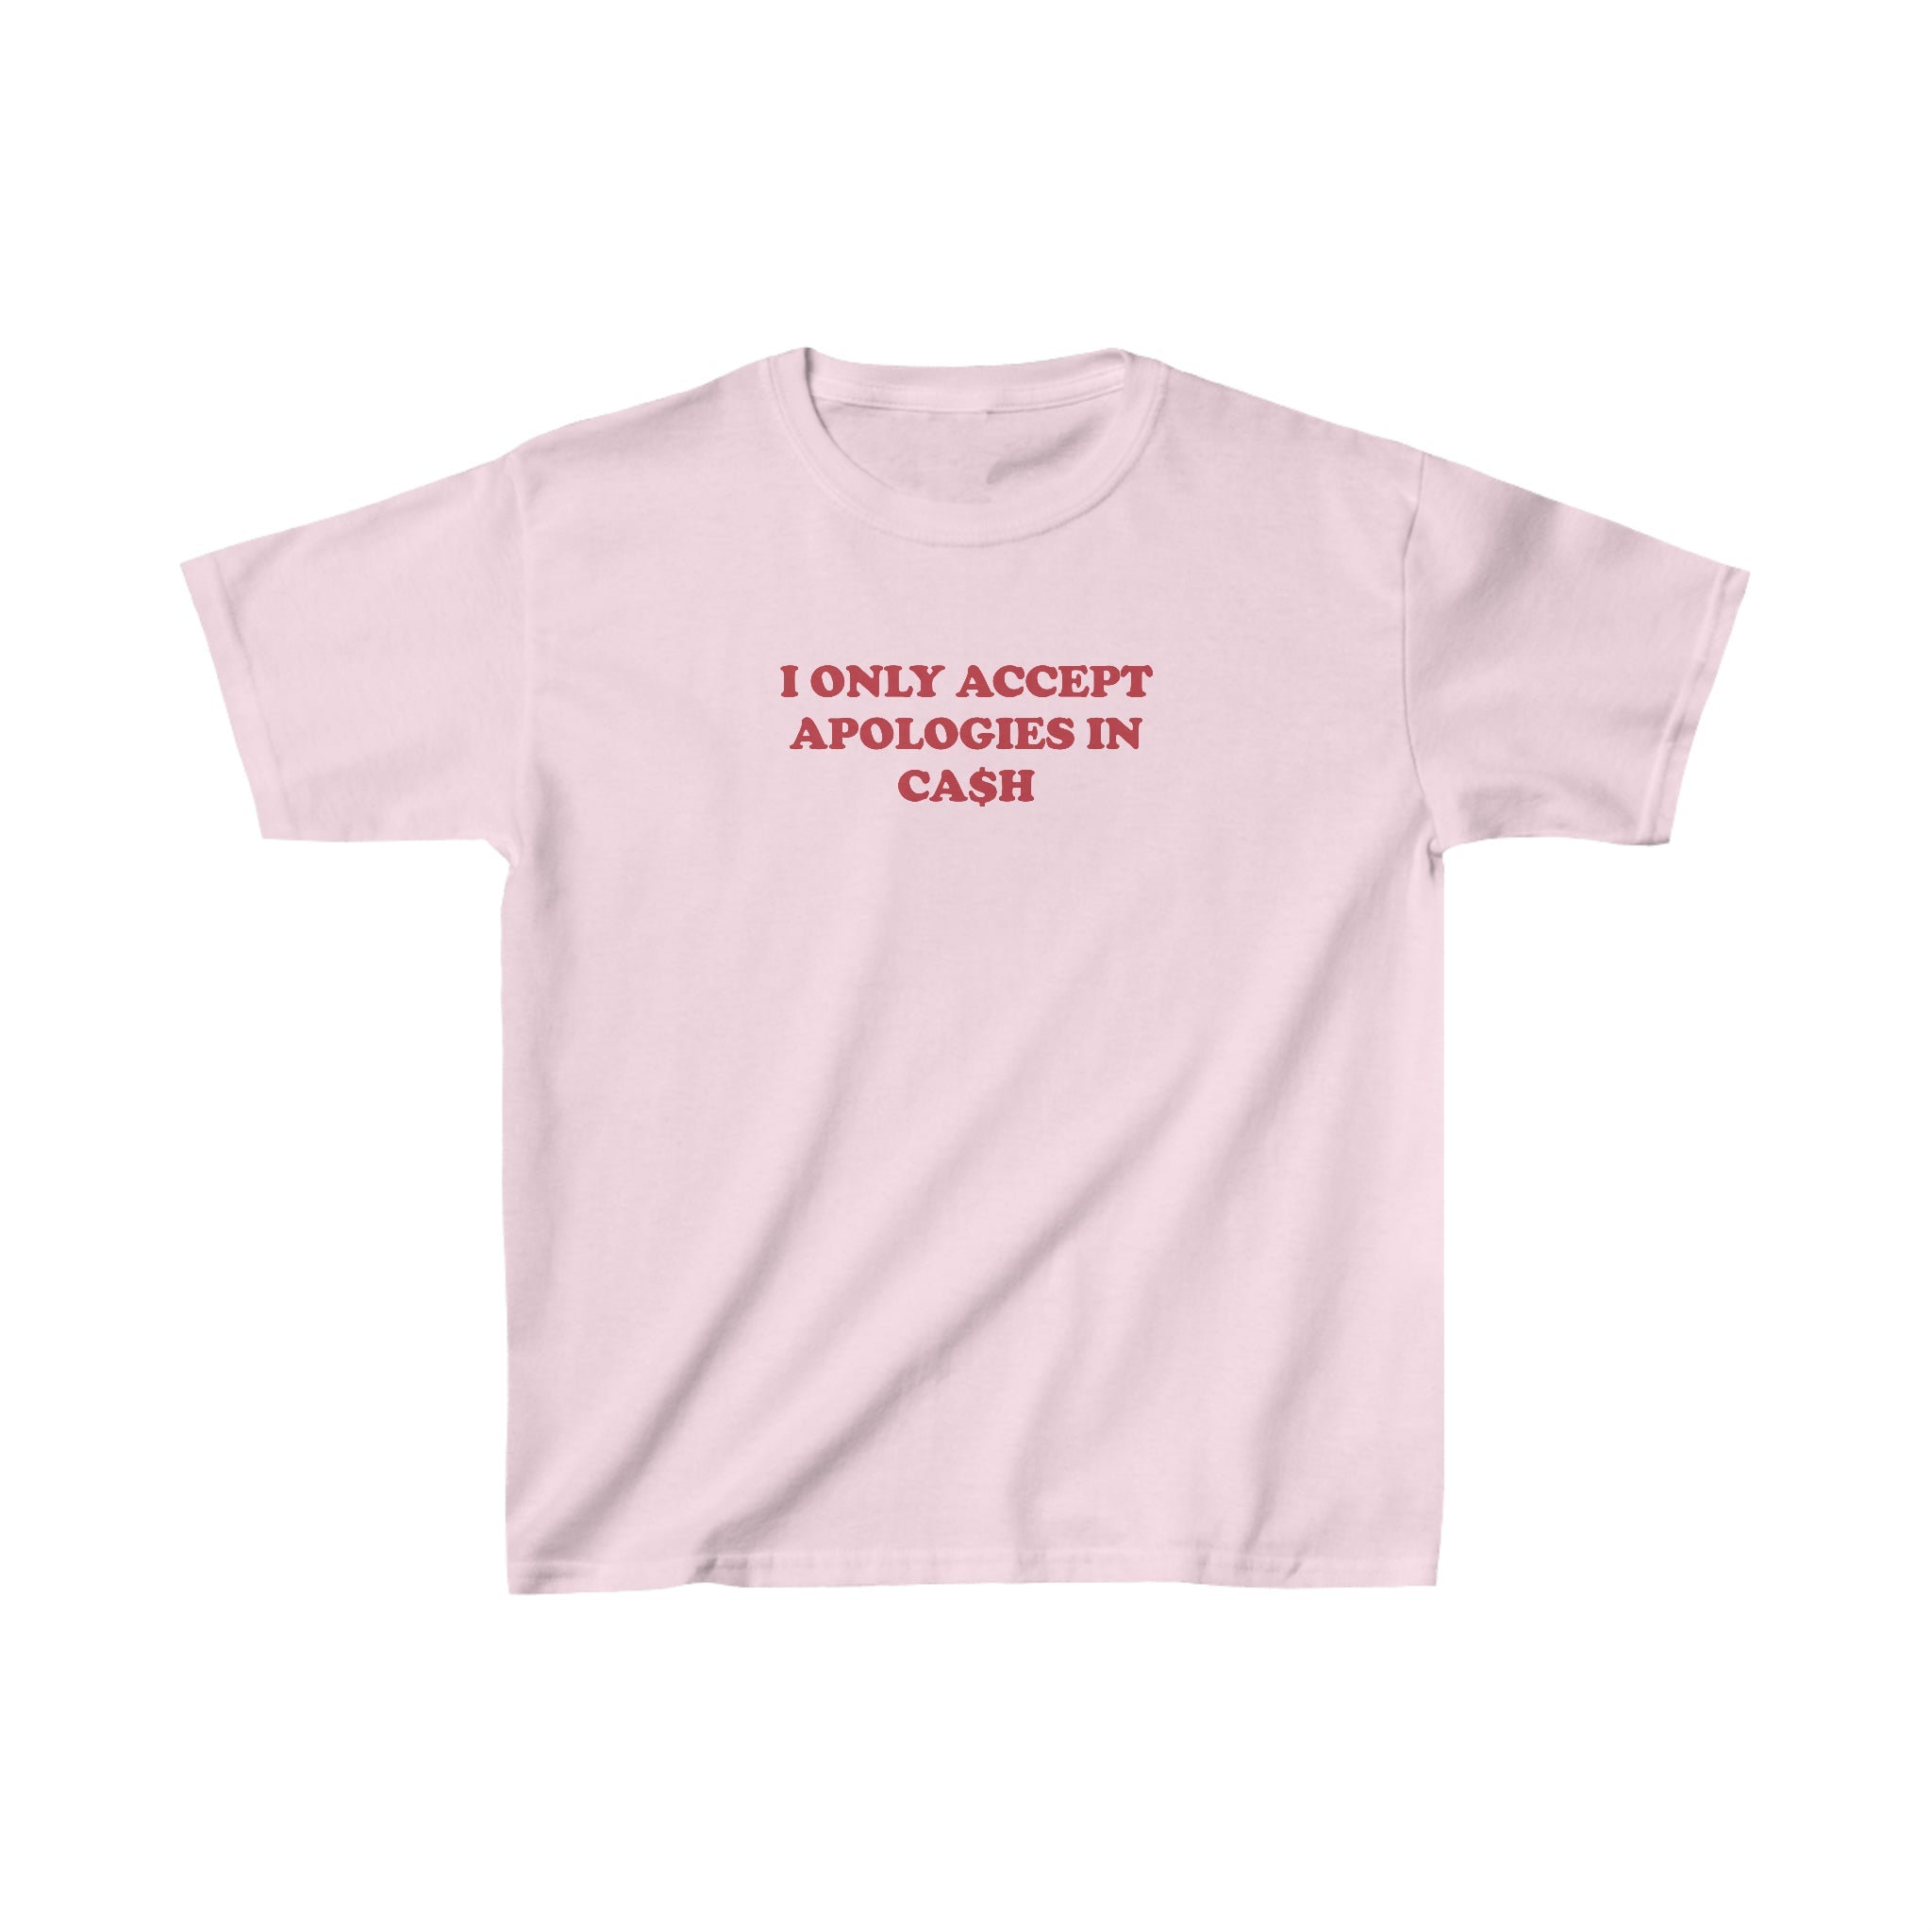 'I Only Accept Apologies in Cash' baby tee - In Print We Trust